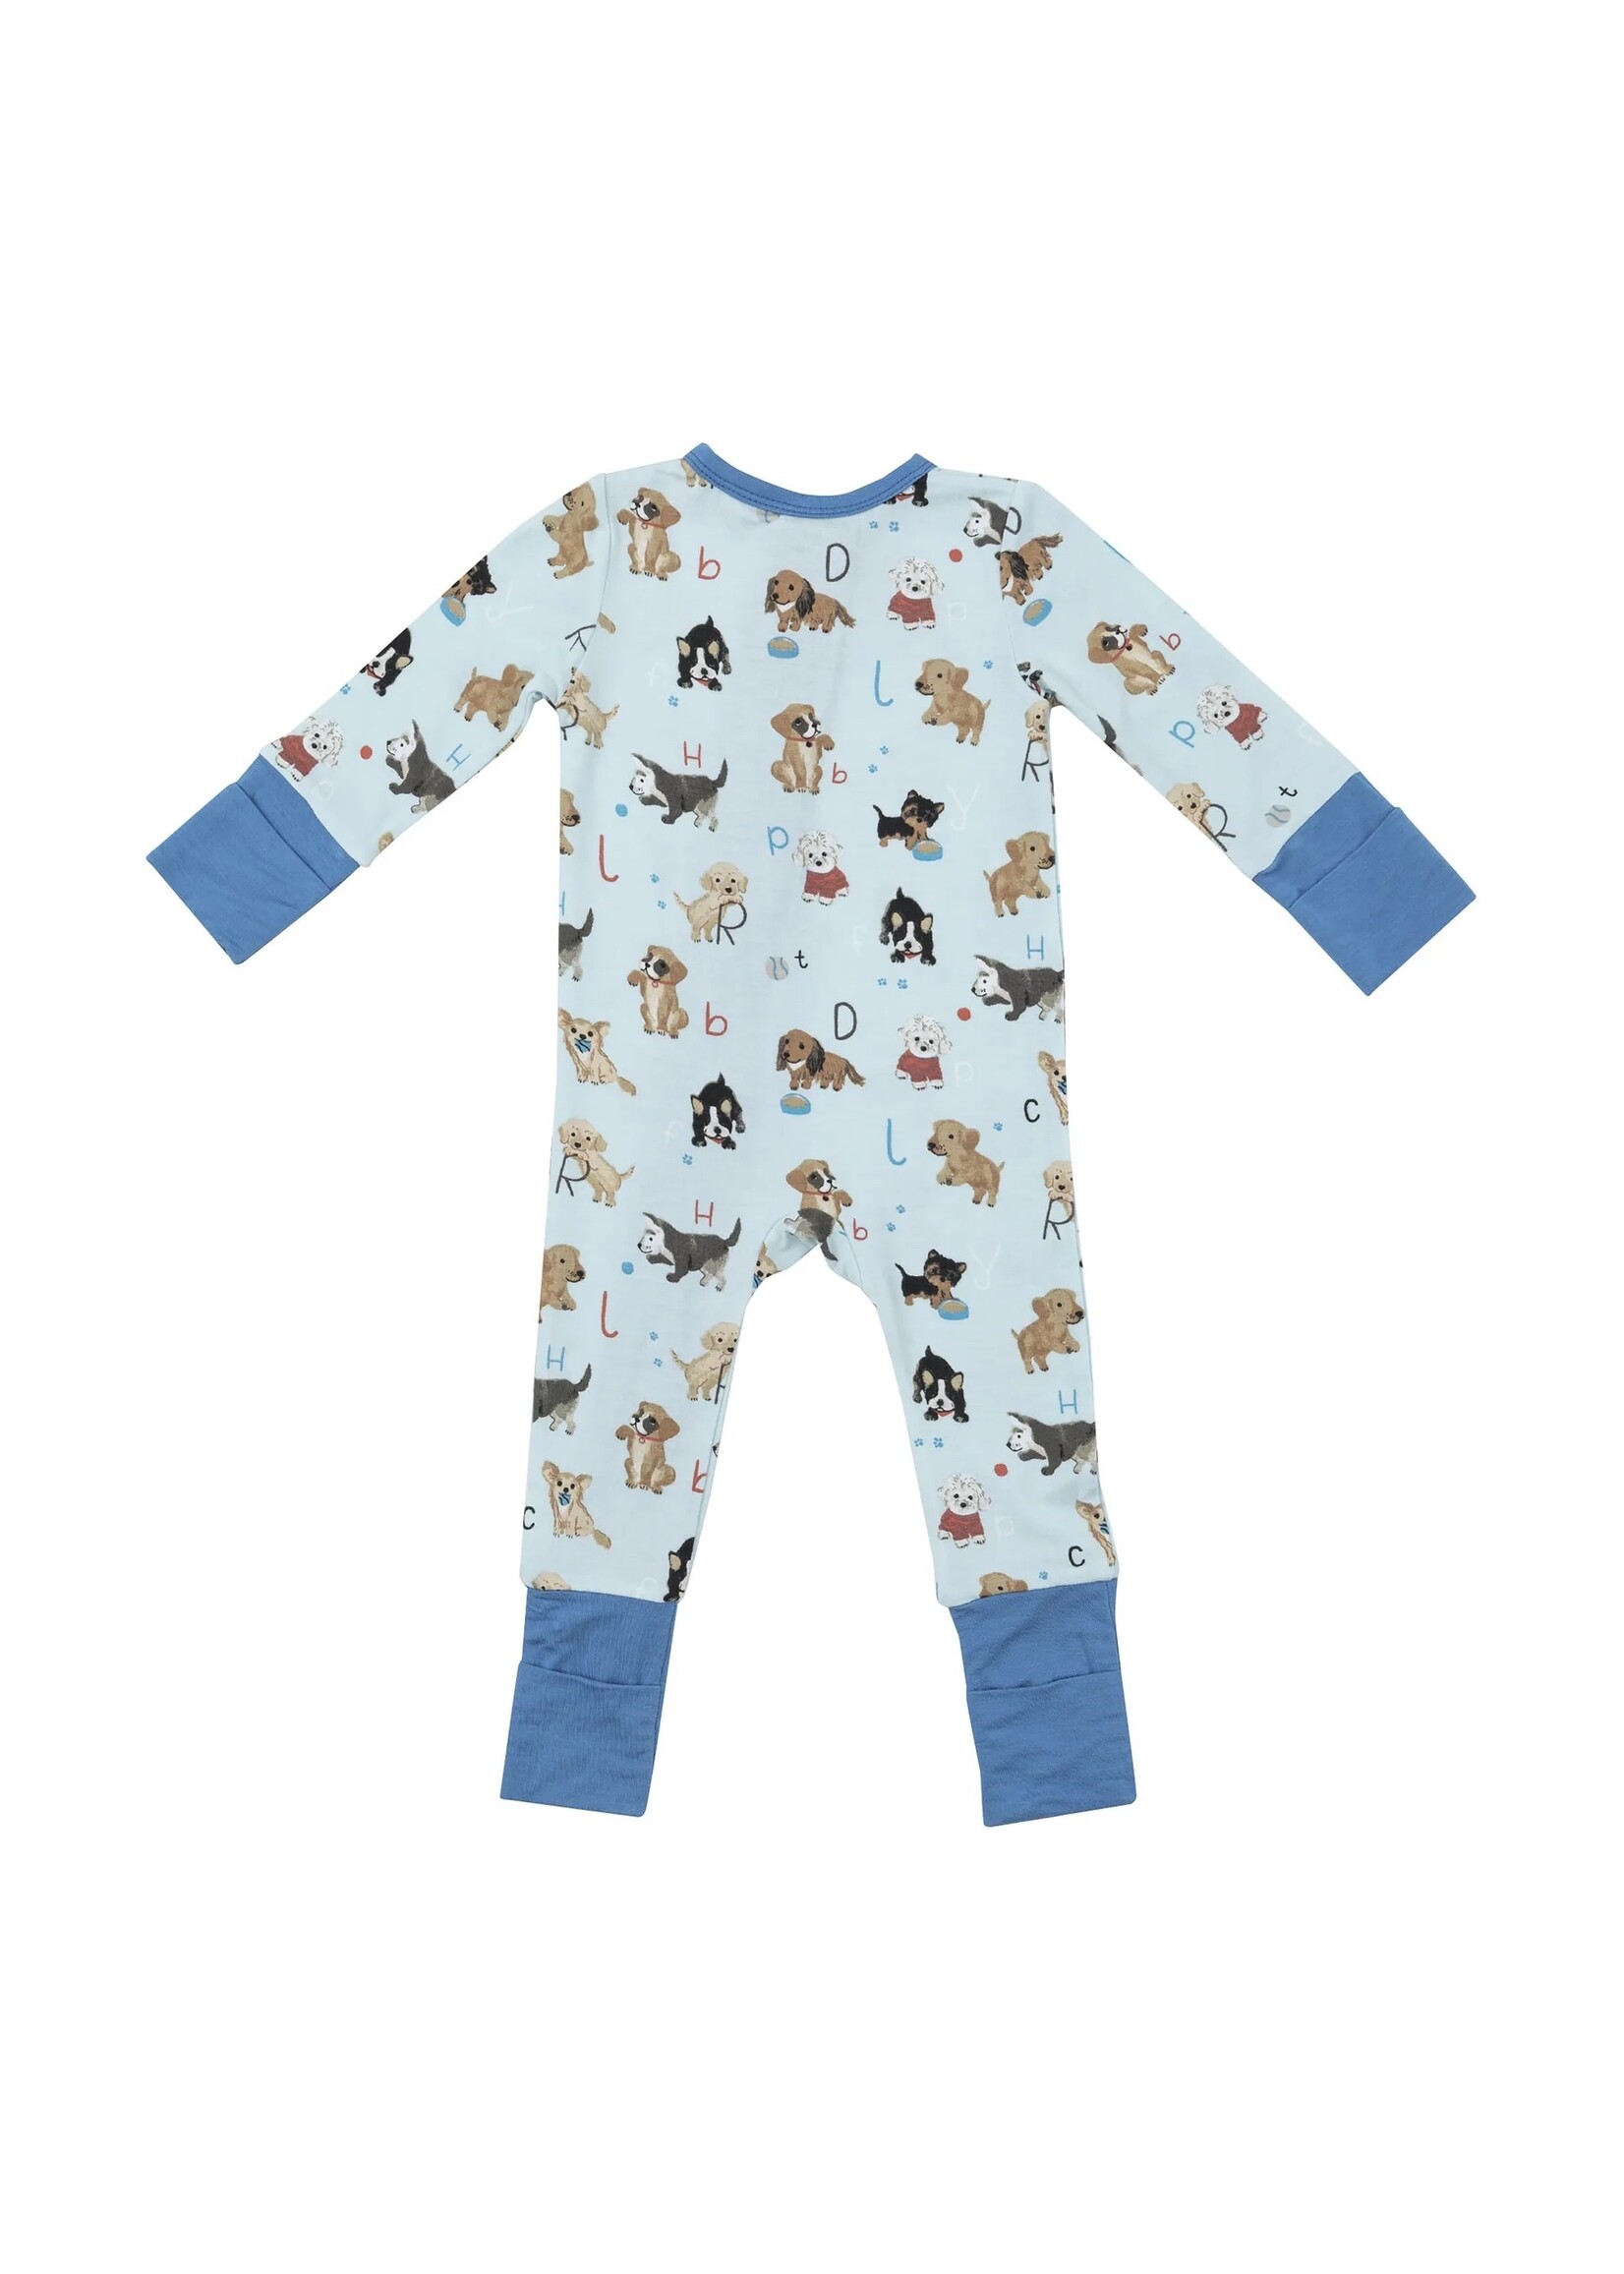 Angel Dear 2 Way Zipper Romper - Puppy Alphabet (available in 2 colors)